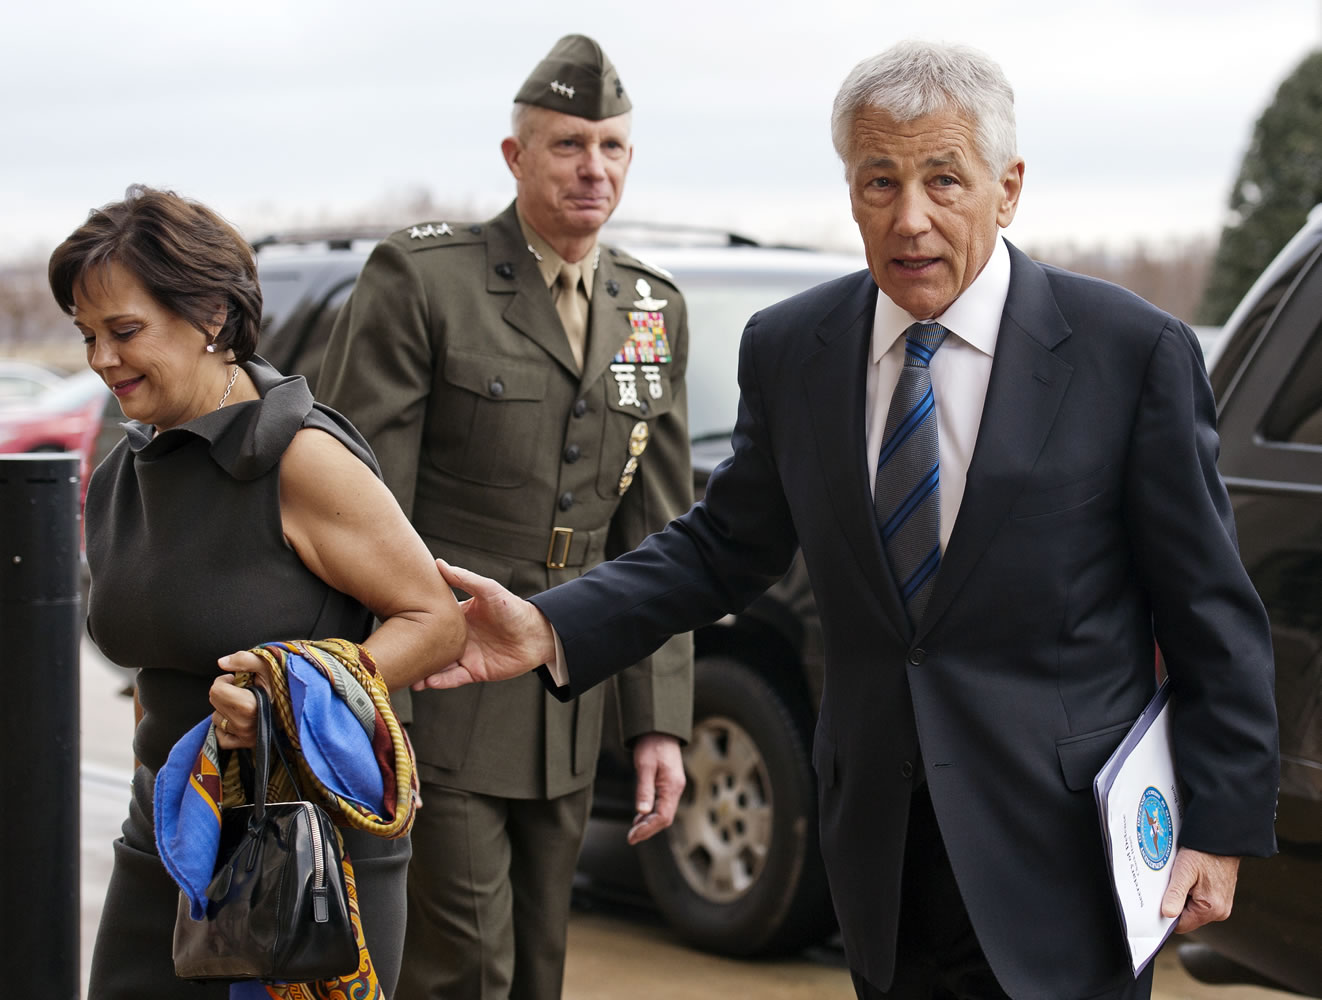 Marine Corp. Lt. Gen. Tom Waldheuser, center, greets Sen. Chuck Hagel, R-Neb., right, and his wife, Lilibet, as they arrive at the Pentagon to be sworn-in as Secretary of Defense in Arlington, Va., on Wednesday.